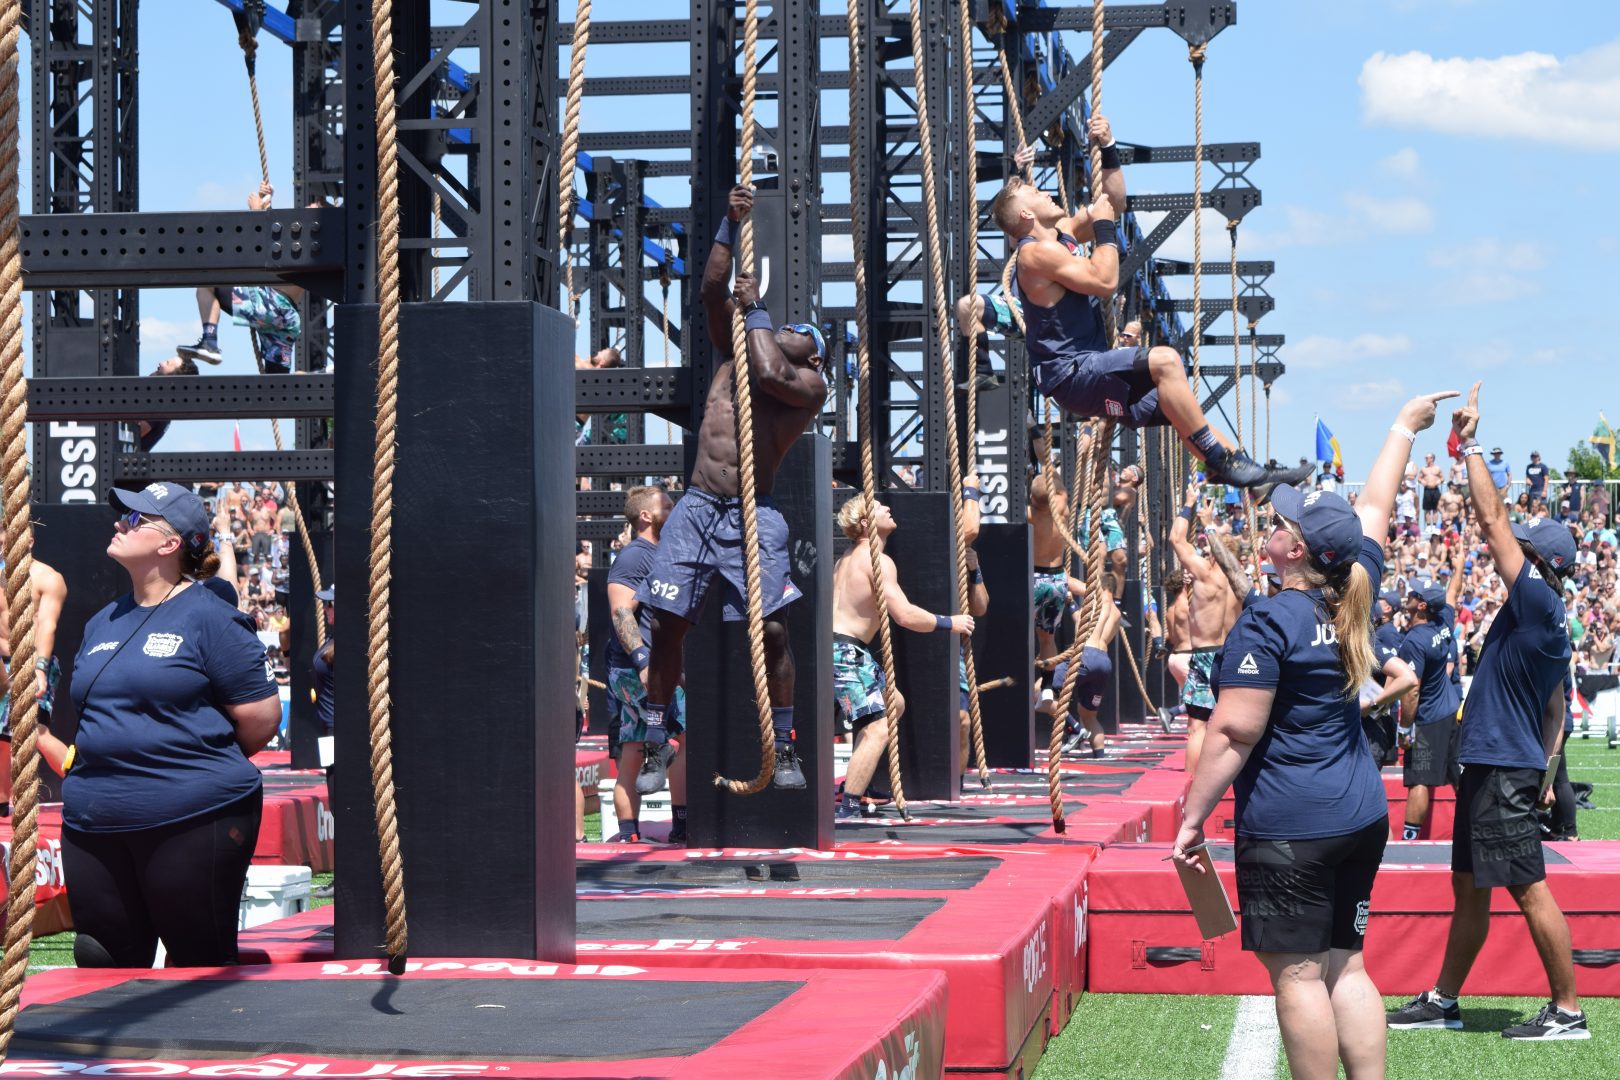 Chandler Smith completes a legless rope climb at the 2019 CrossFit Games